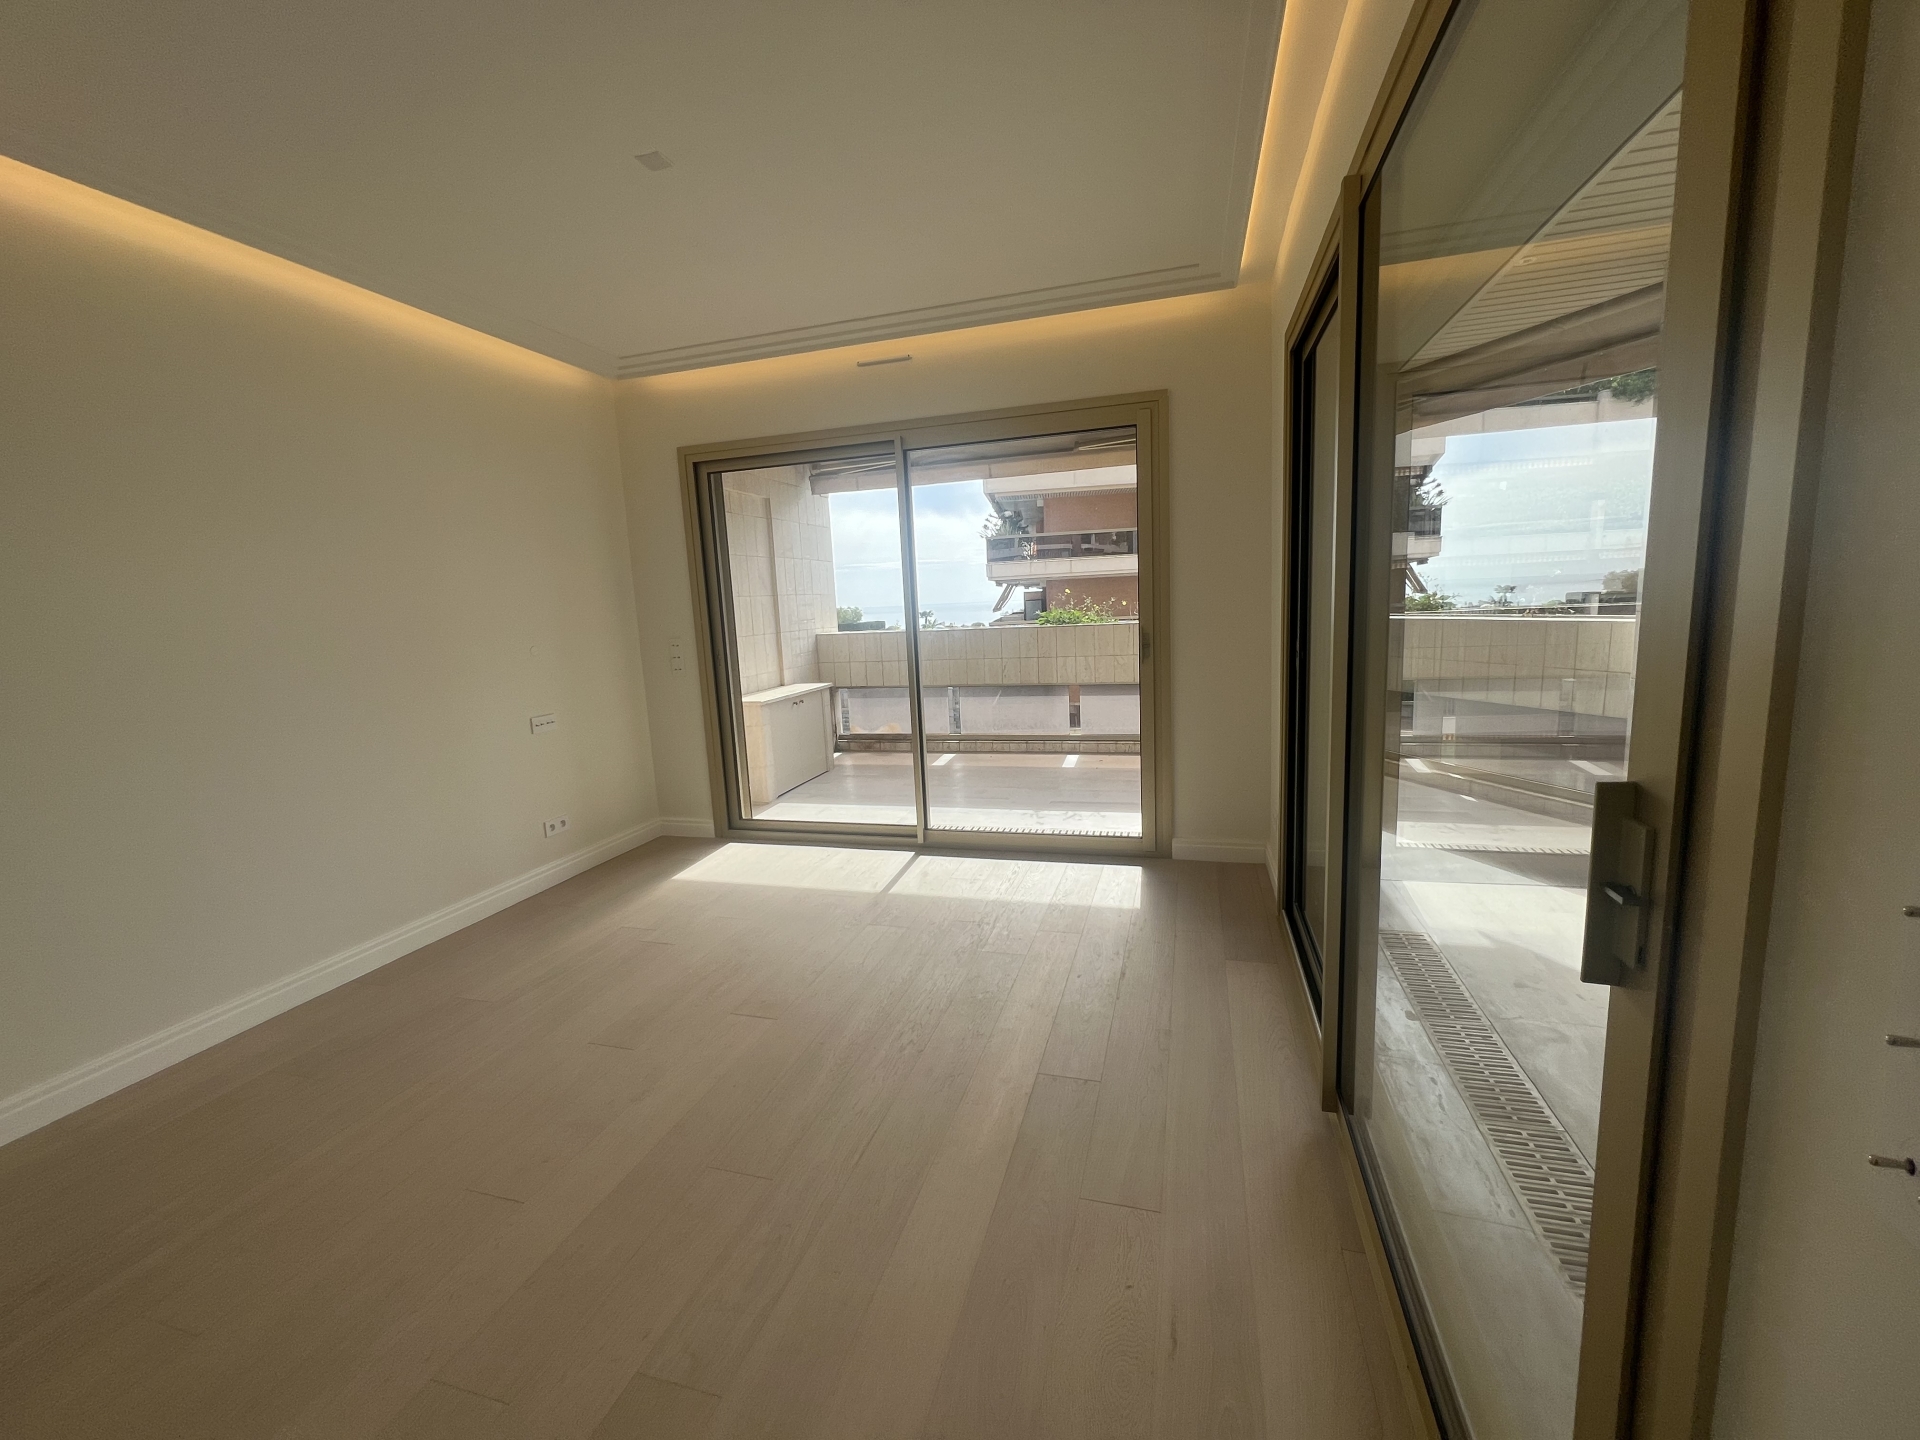 Dotta 5 rooms apartment for rent - GEORGE V - Monte-Carlo - Monaco - imgimage00004